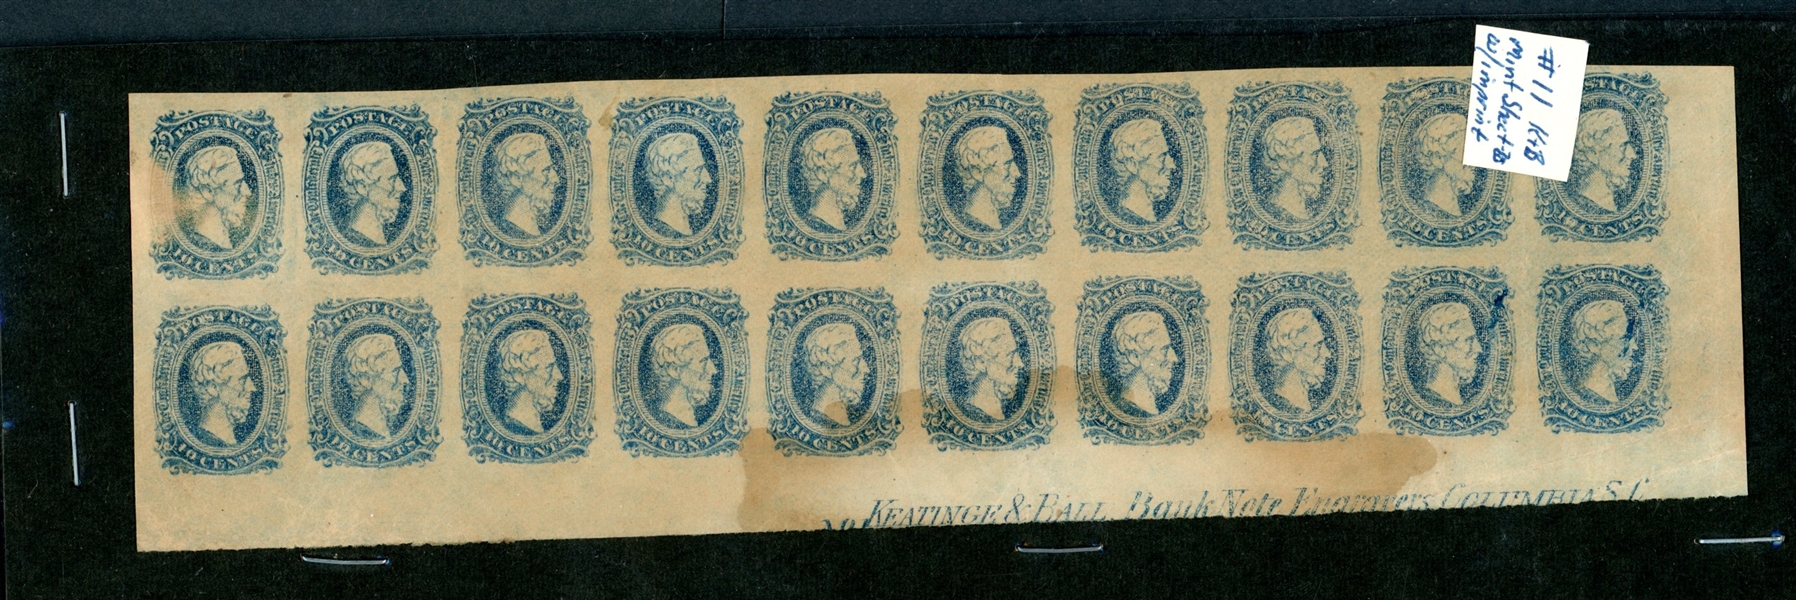 Confederate States Stamps and Covers (Est $400-600)